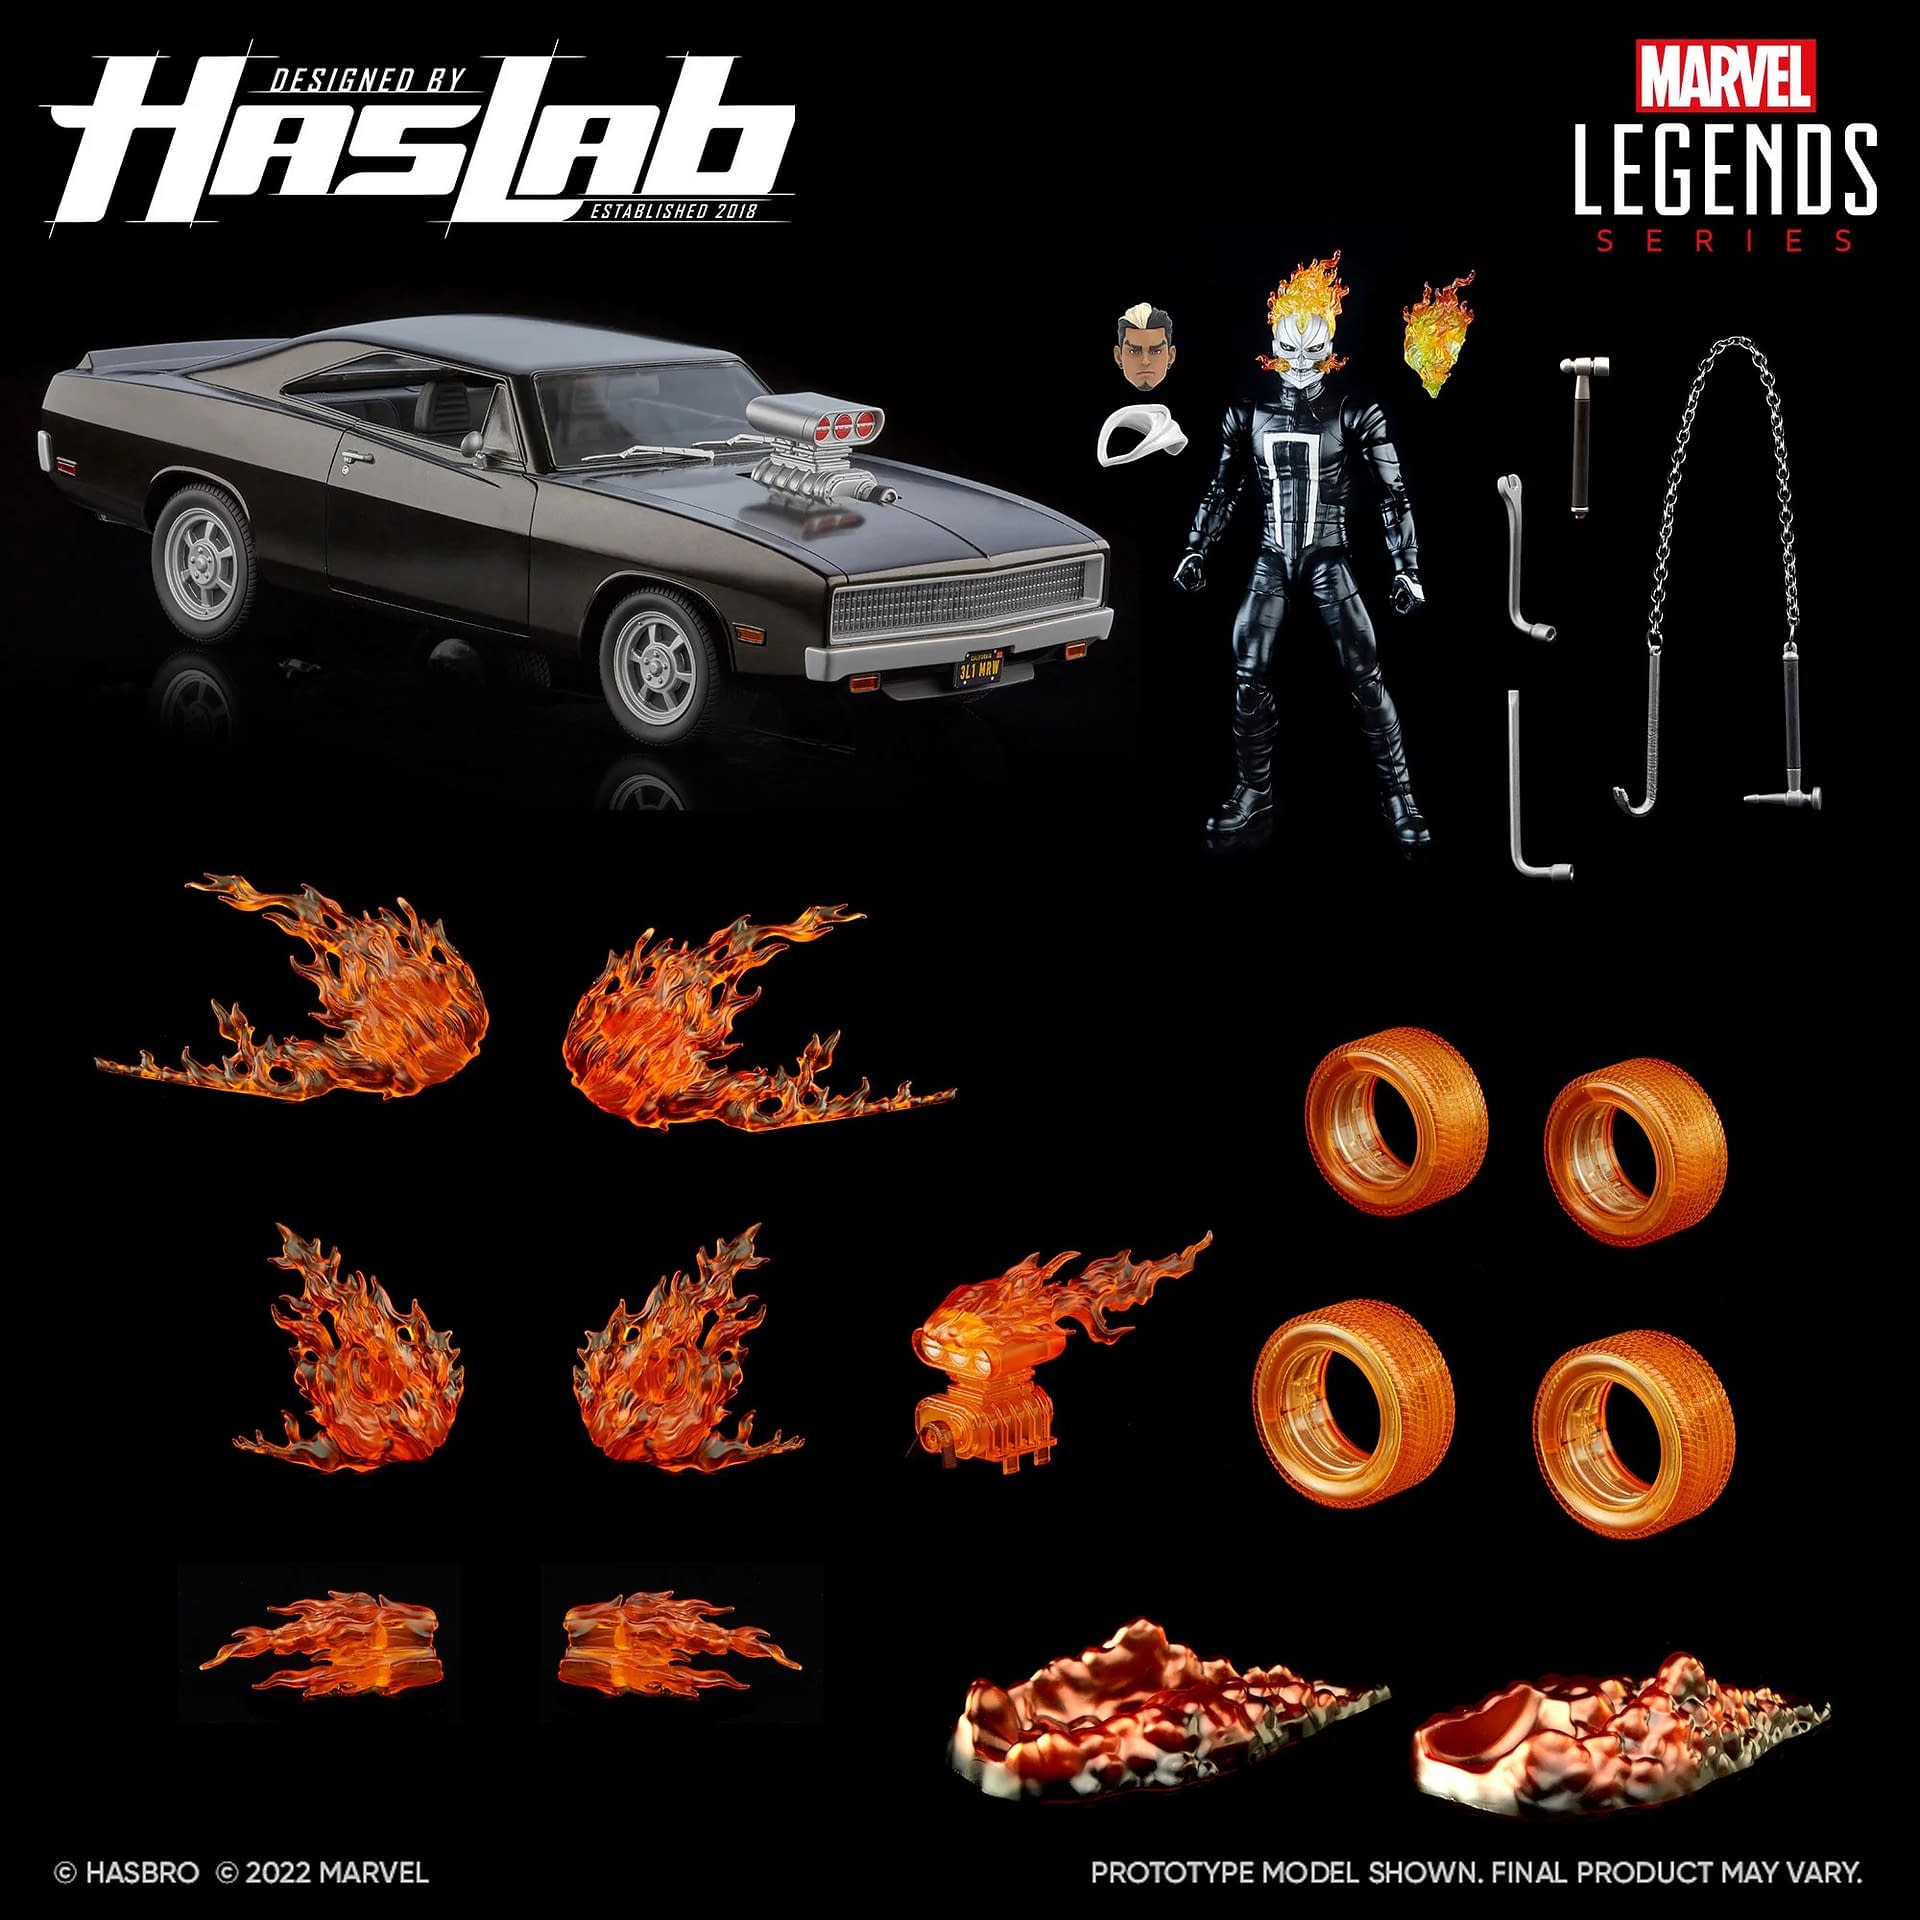 Hasbro Gives Ghost Rider HasLab One Final Push with Daimon Hellstrom 